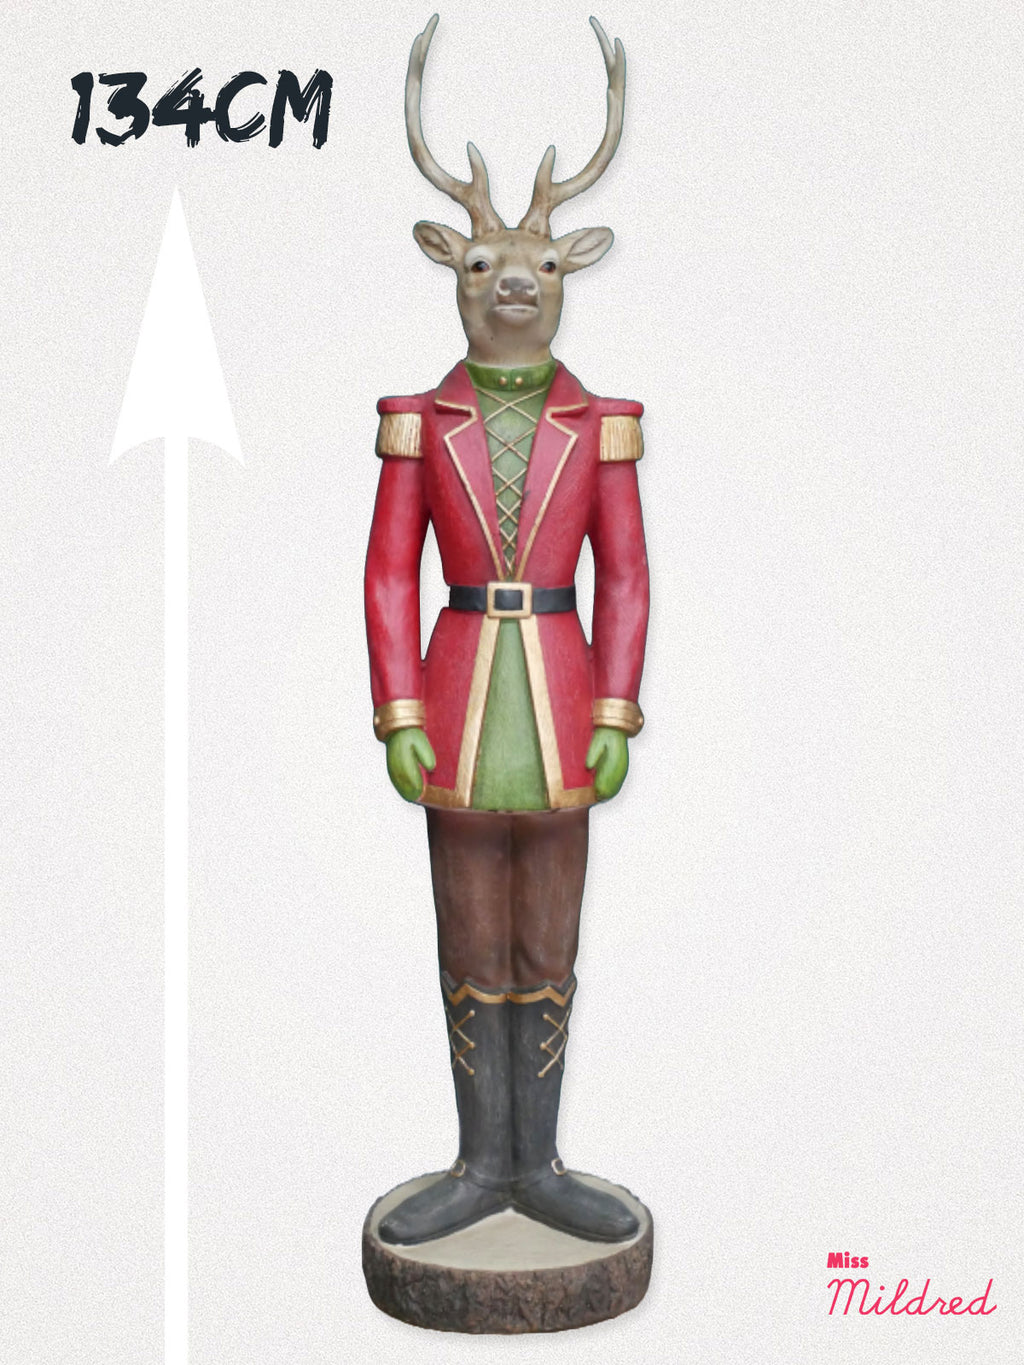 Gentry Deer Stag Giant Statue - 134cm